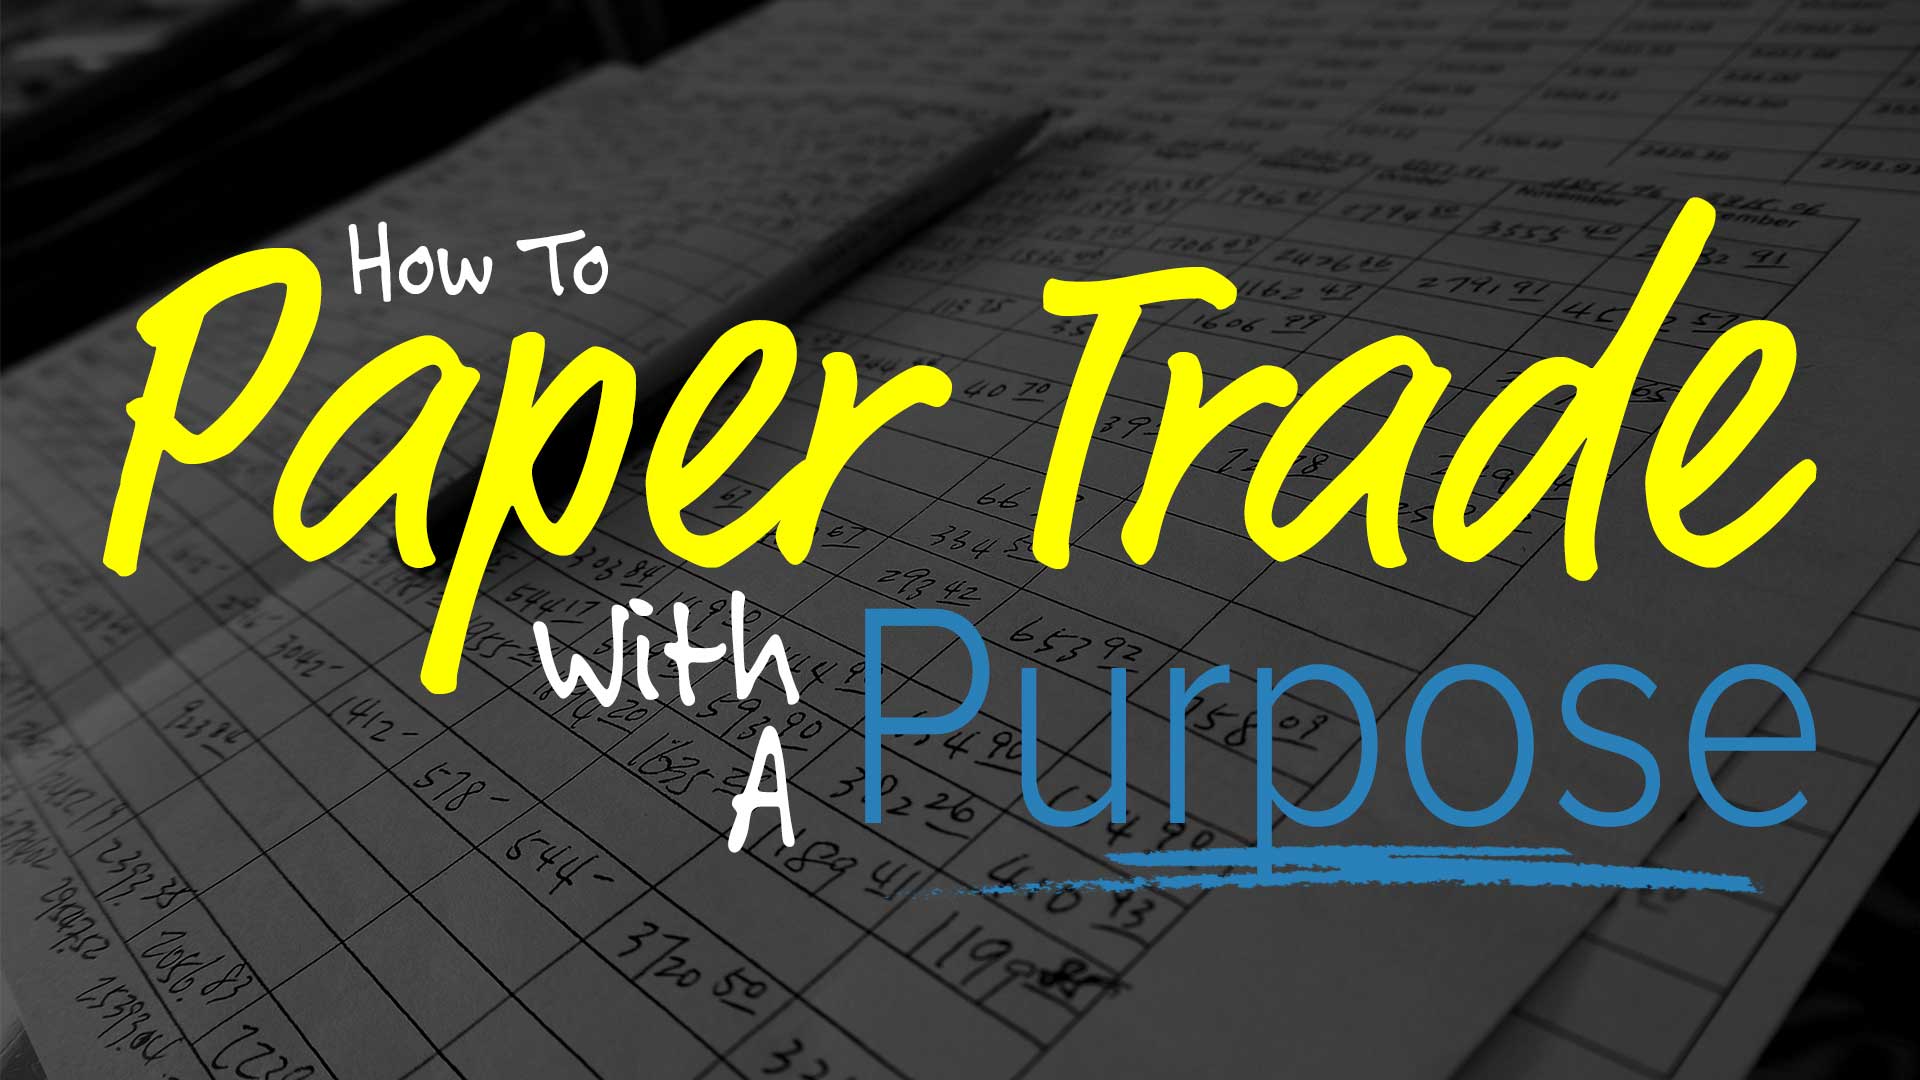 How To Paper Trade With A Purpose